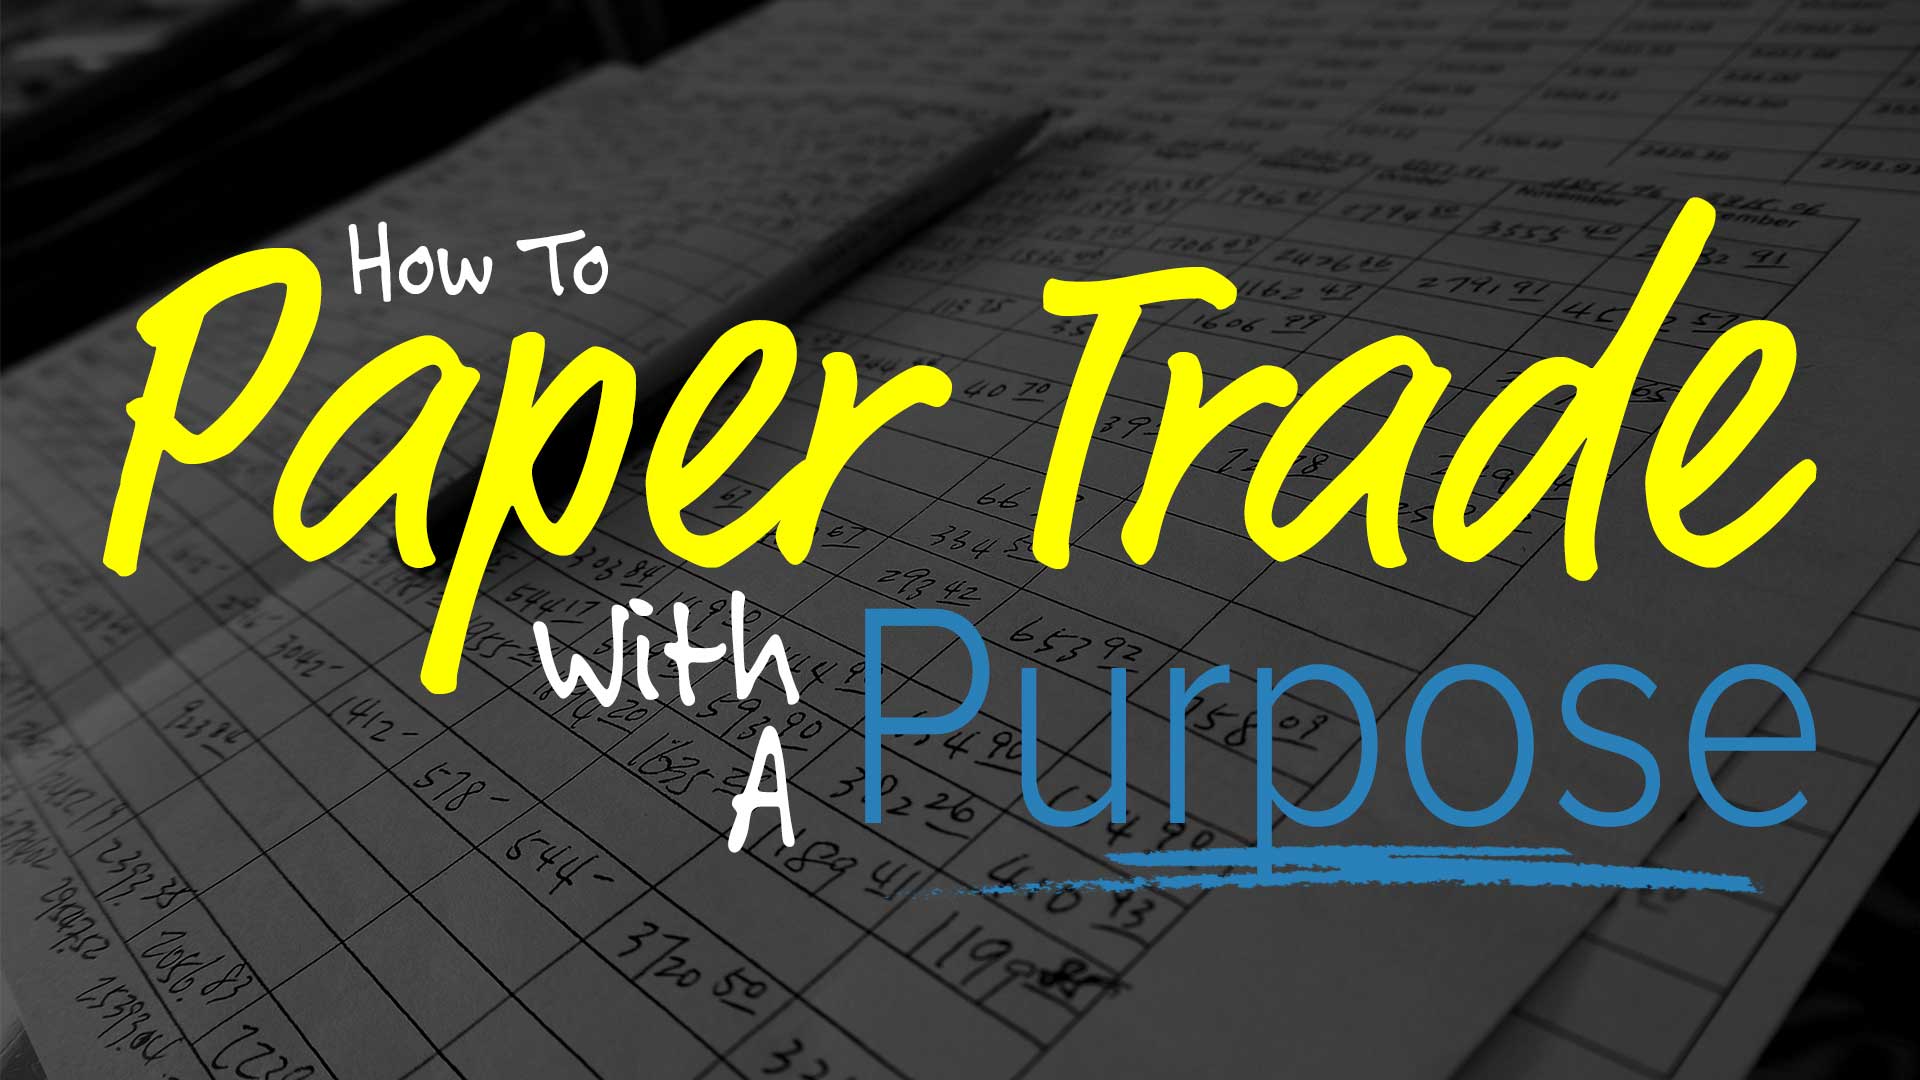 How To Paper Trade With A Purpose